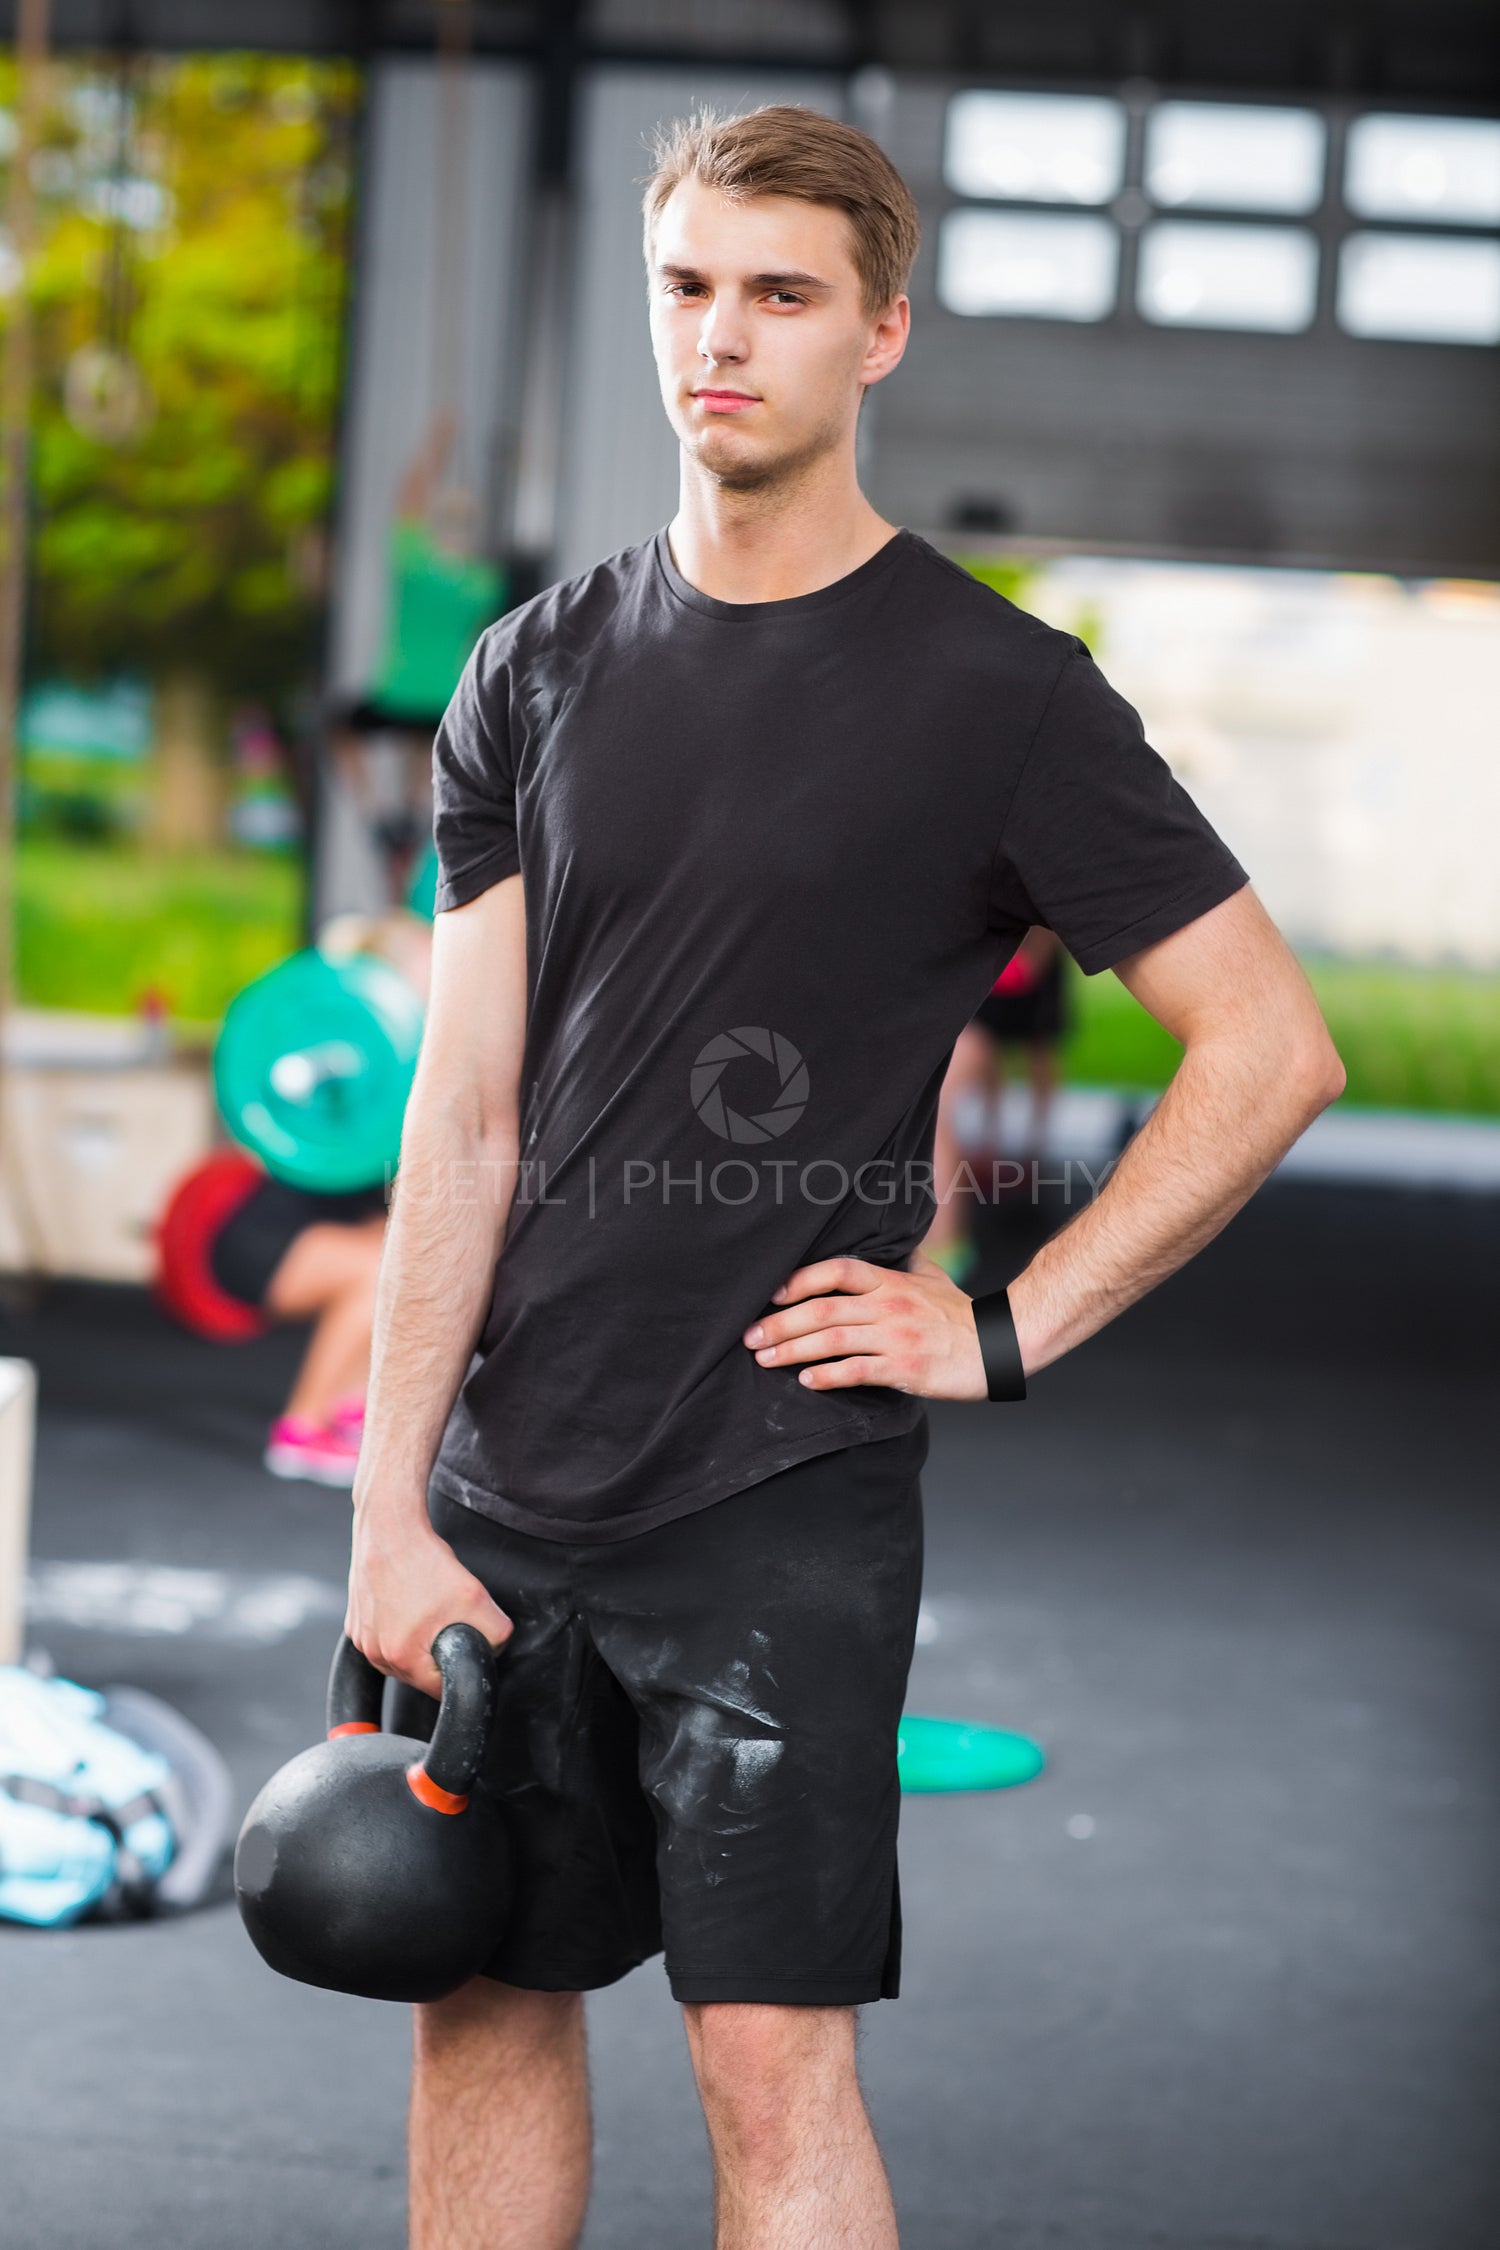 Confident Gym Instructor Holding Kettlebell In Health Club